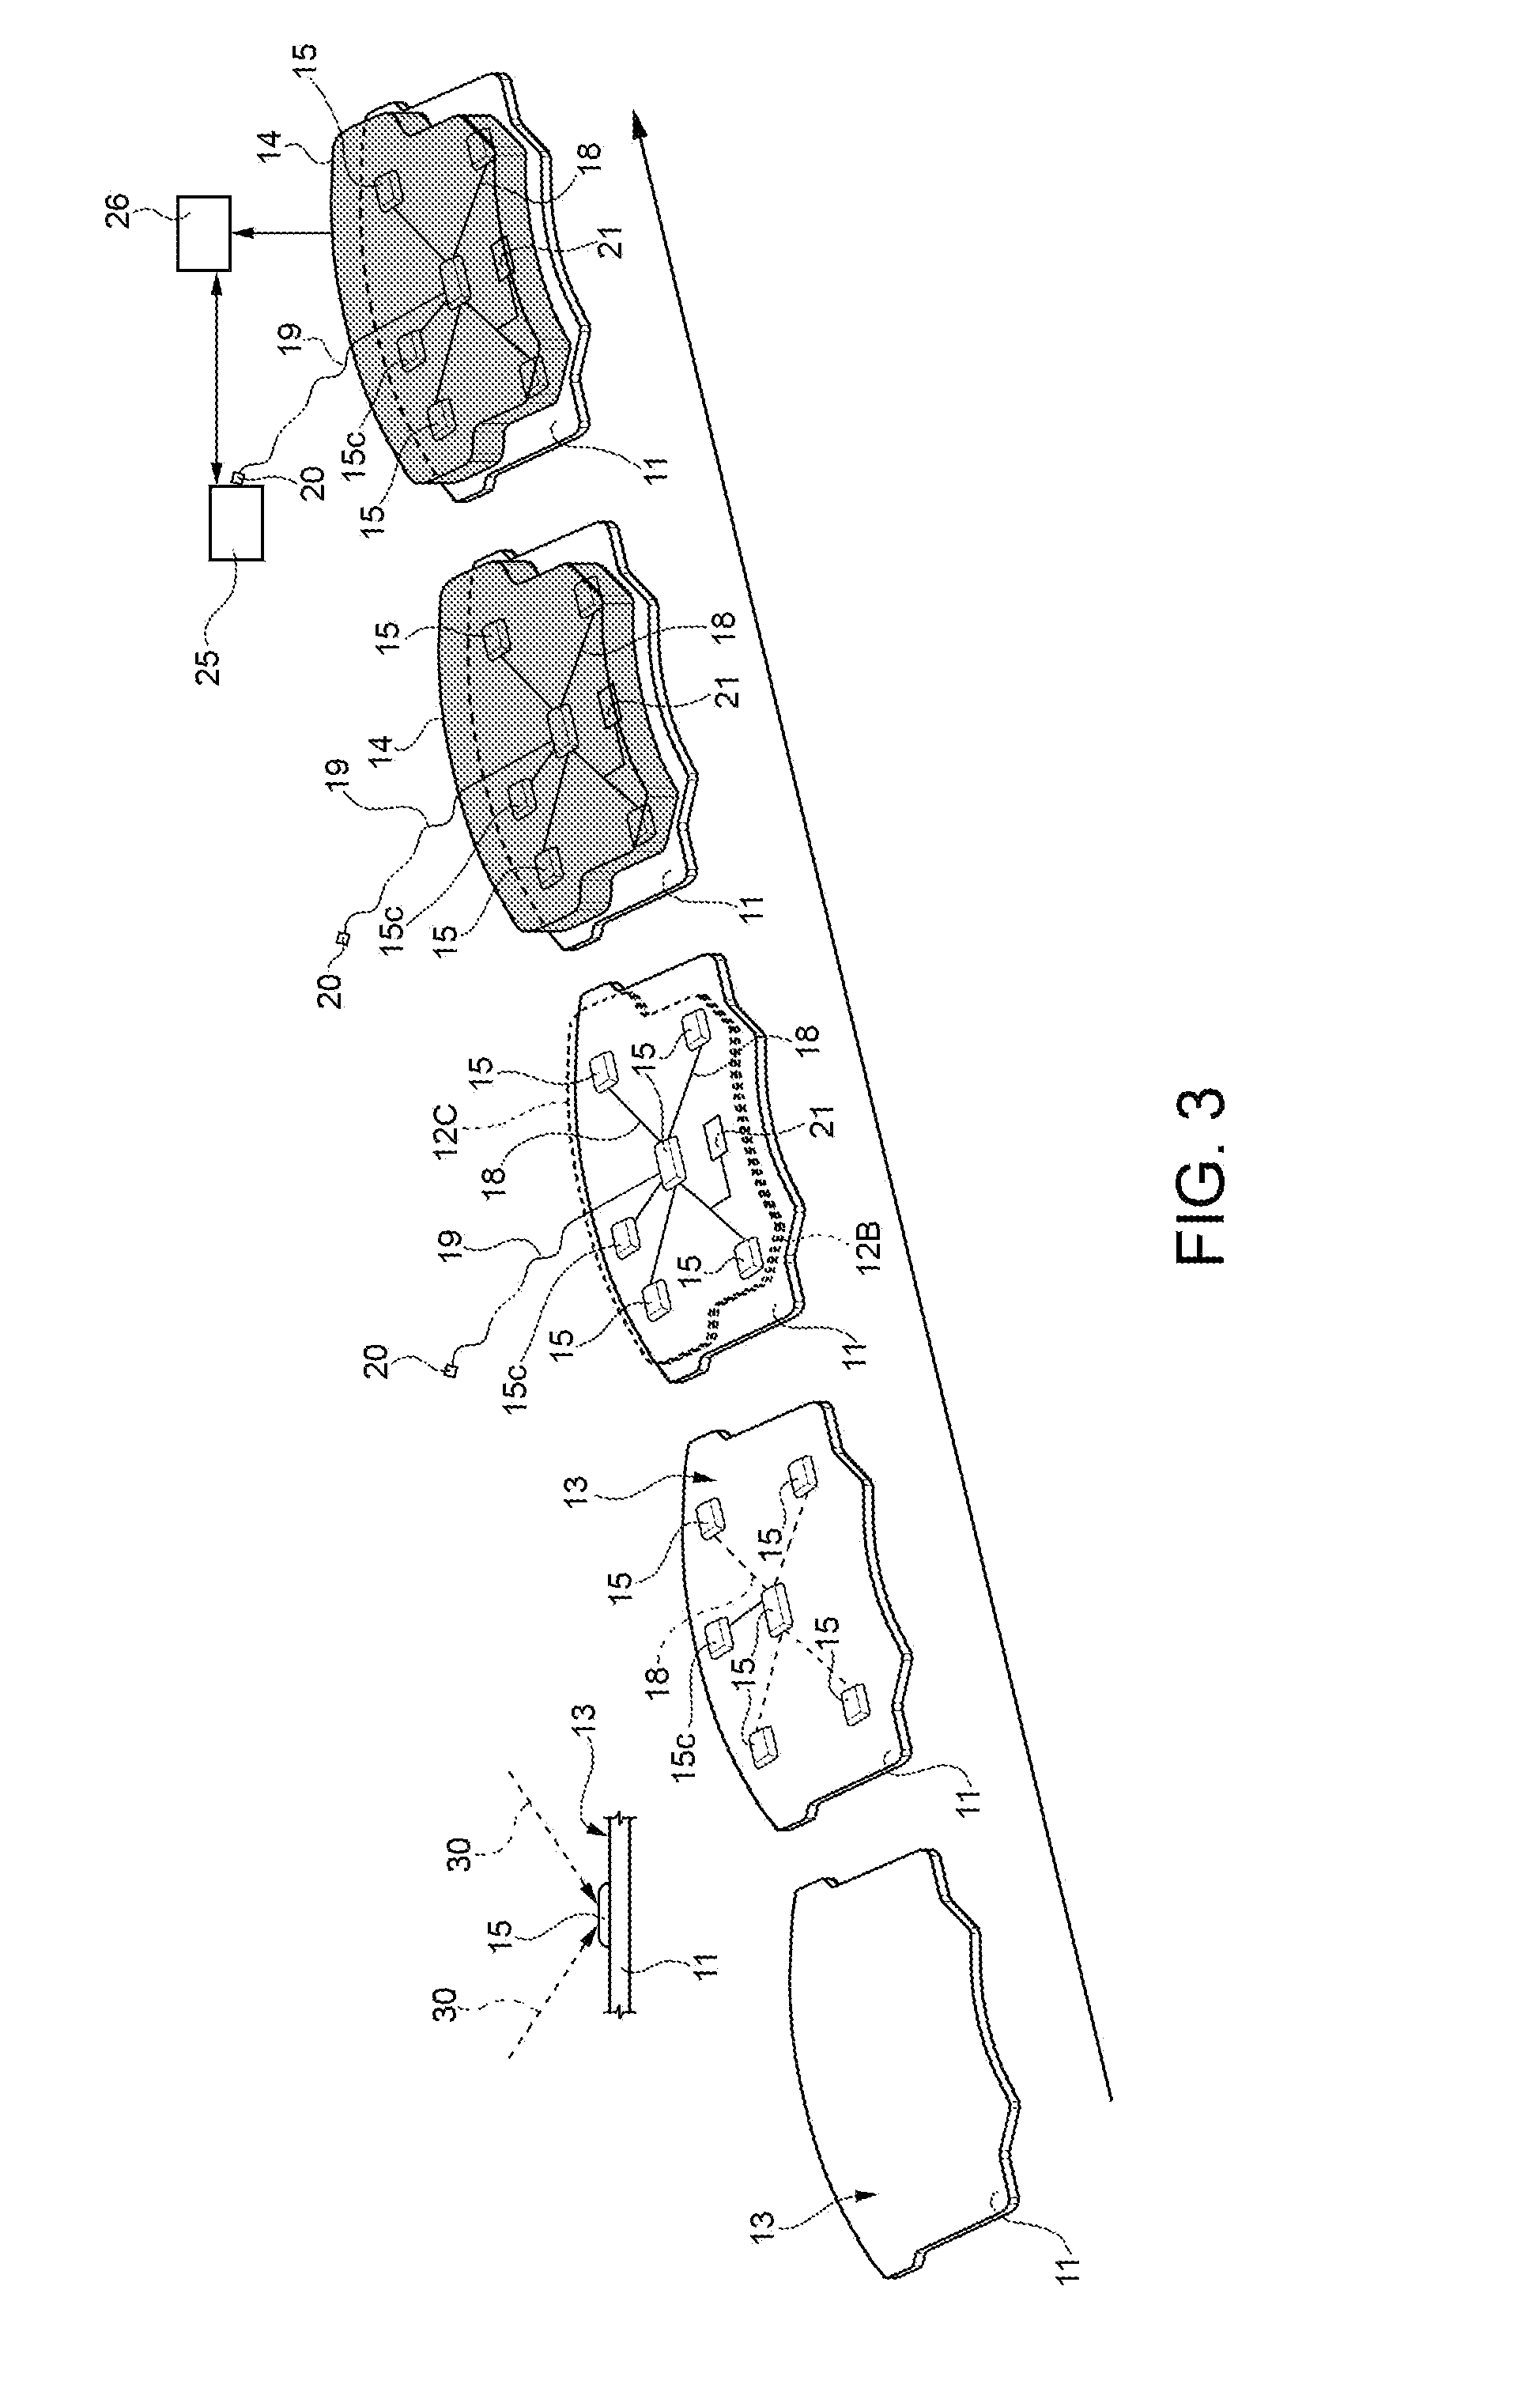 Method for manufacturing a braking element with integrated sensor, in particular a brake pad, brake pad with integrated sensor, vehicle braking system and associated method